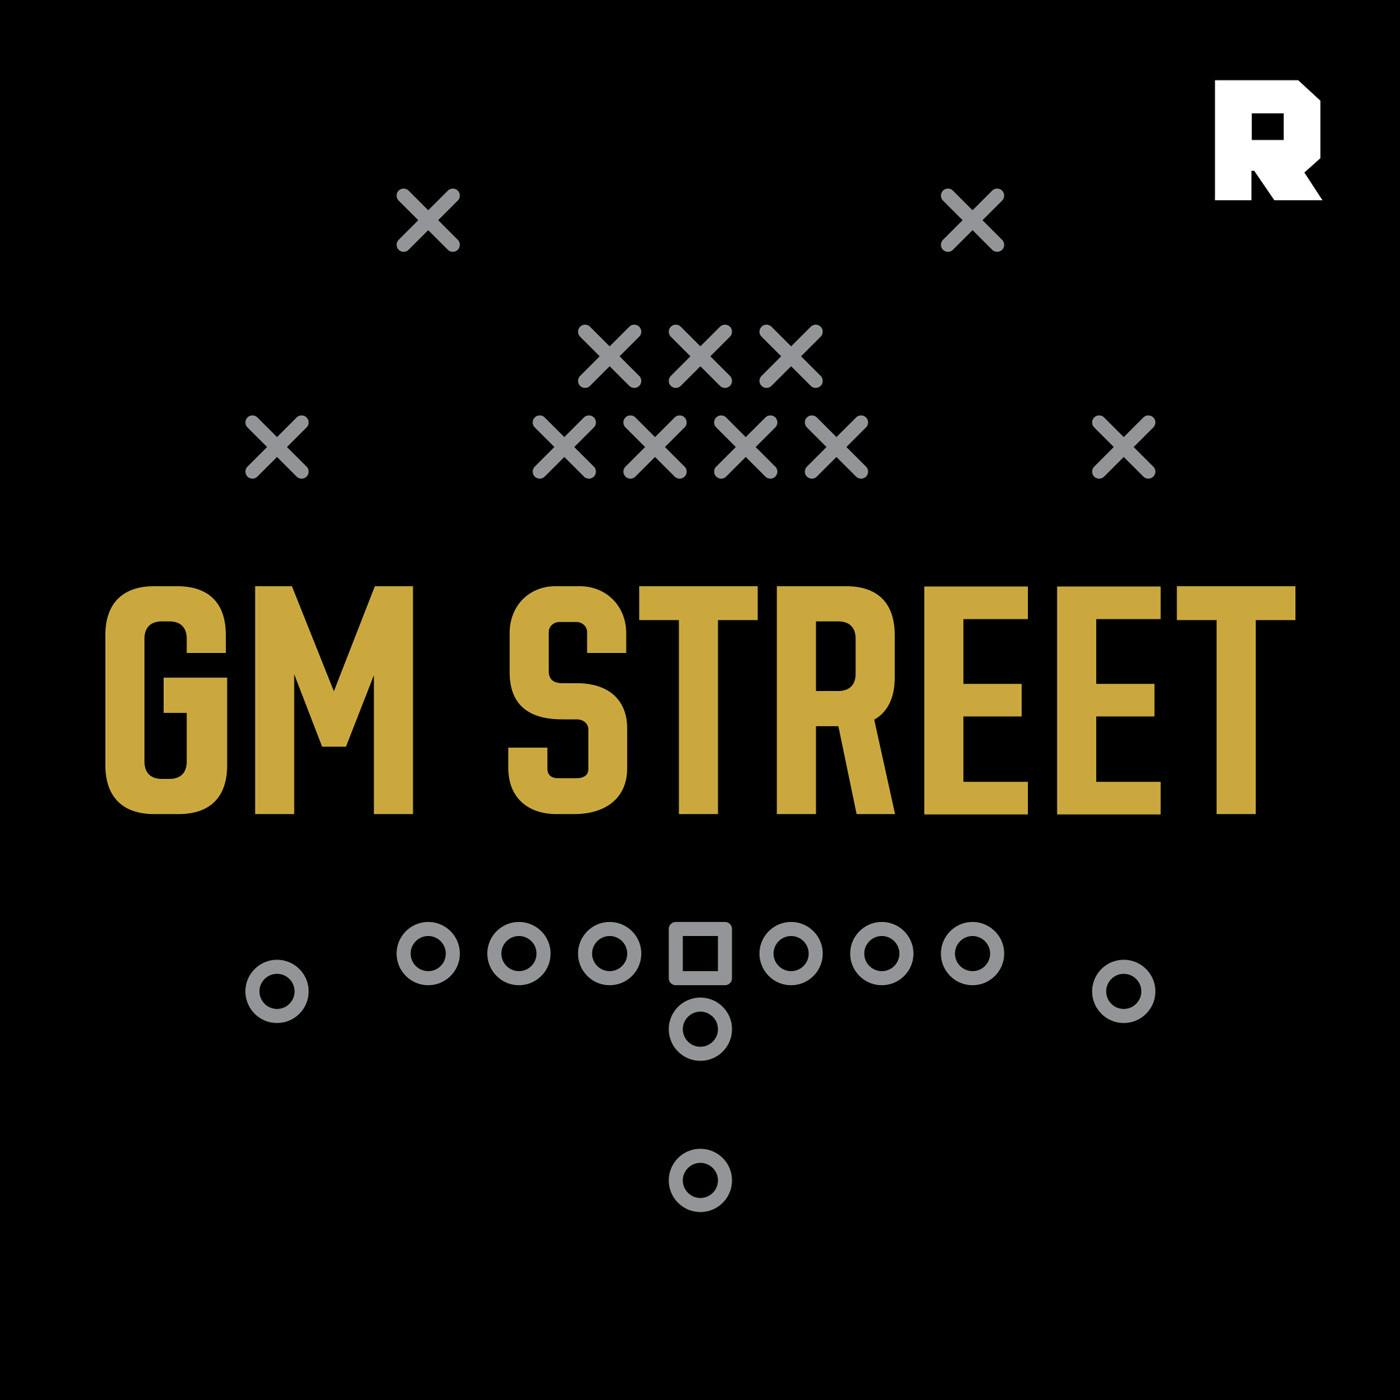 The Baker Mayfield Rumor, Tom Brady's Next Deal, and the QB Landscape | GM Street (Ep. 263)